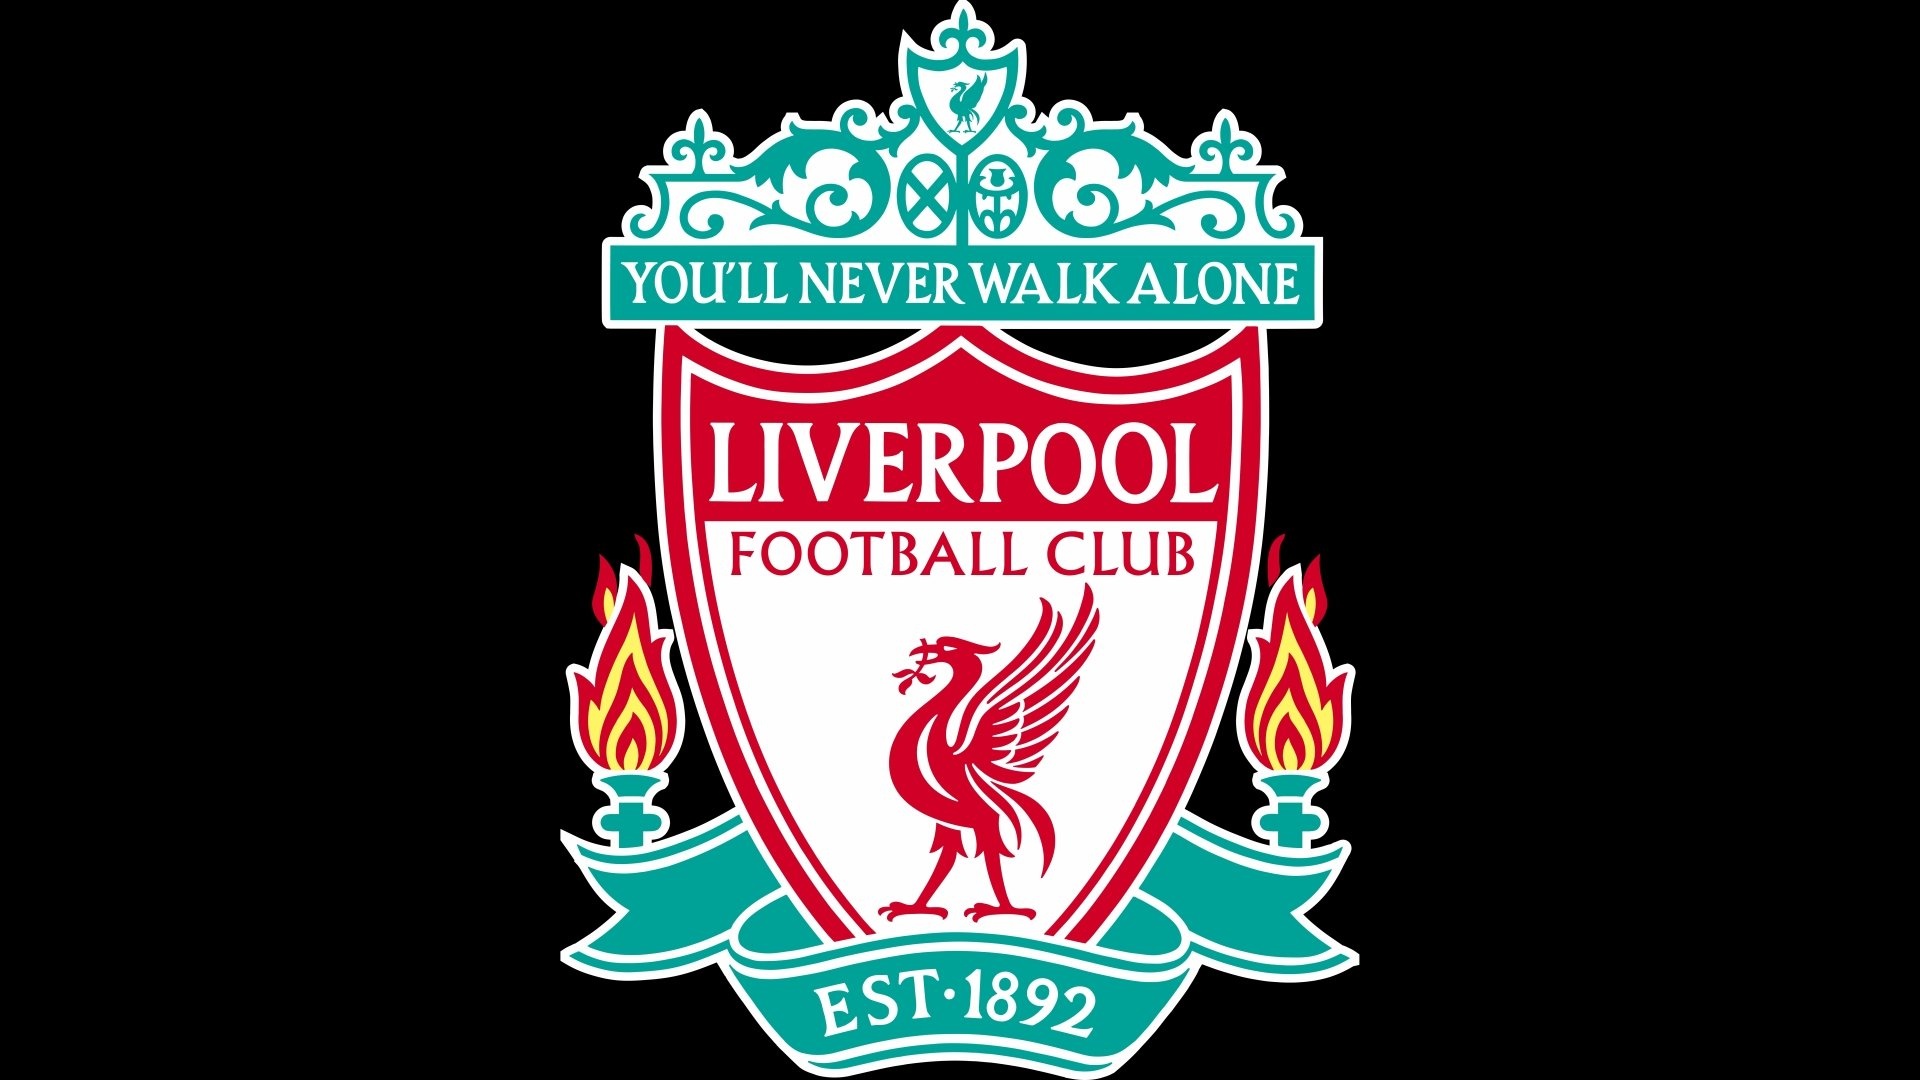 Liverpool Football Club: Founded in 1892 and is one of the world's most historic and famous football clubs. 1920x1080 Full HD Background.